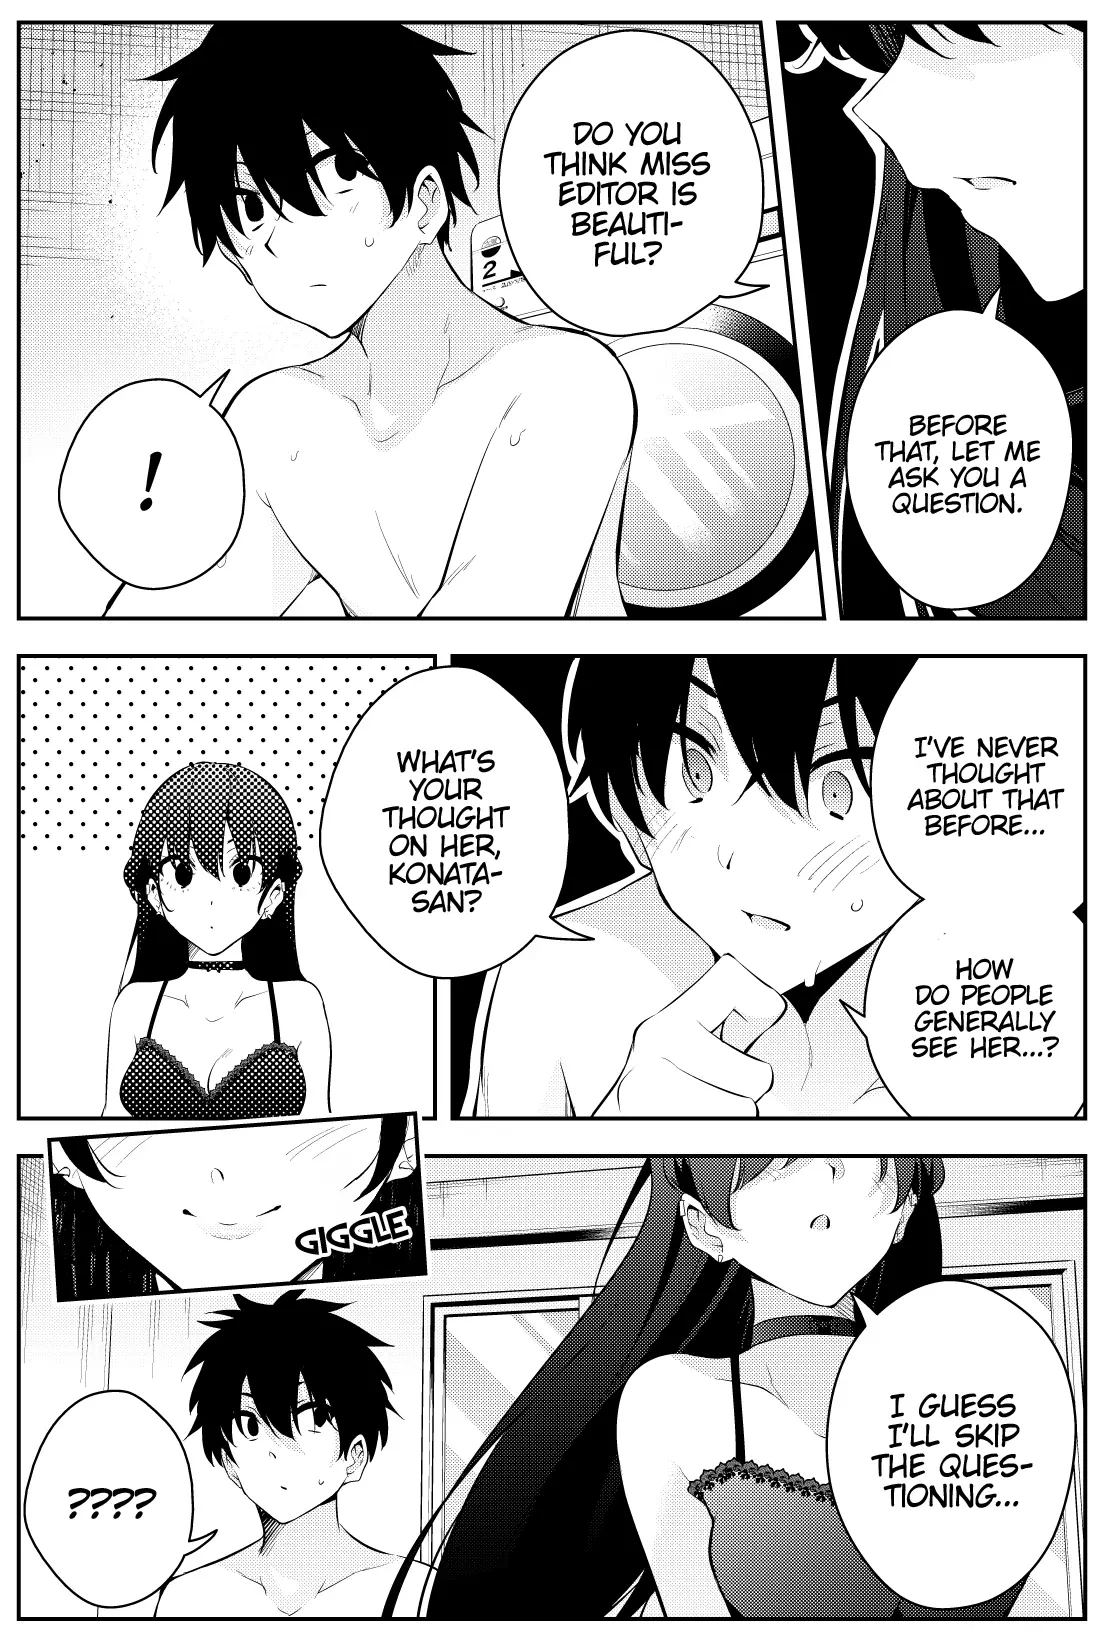 The Story Of A Manga Artist Confined By A Strange High School Girl - 45 page 7-4263767e